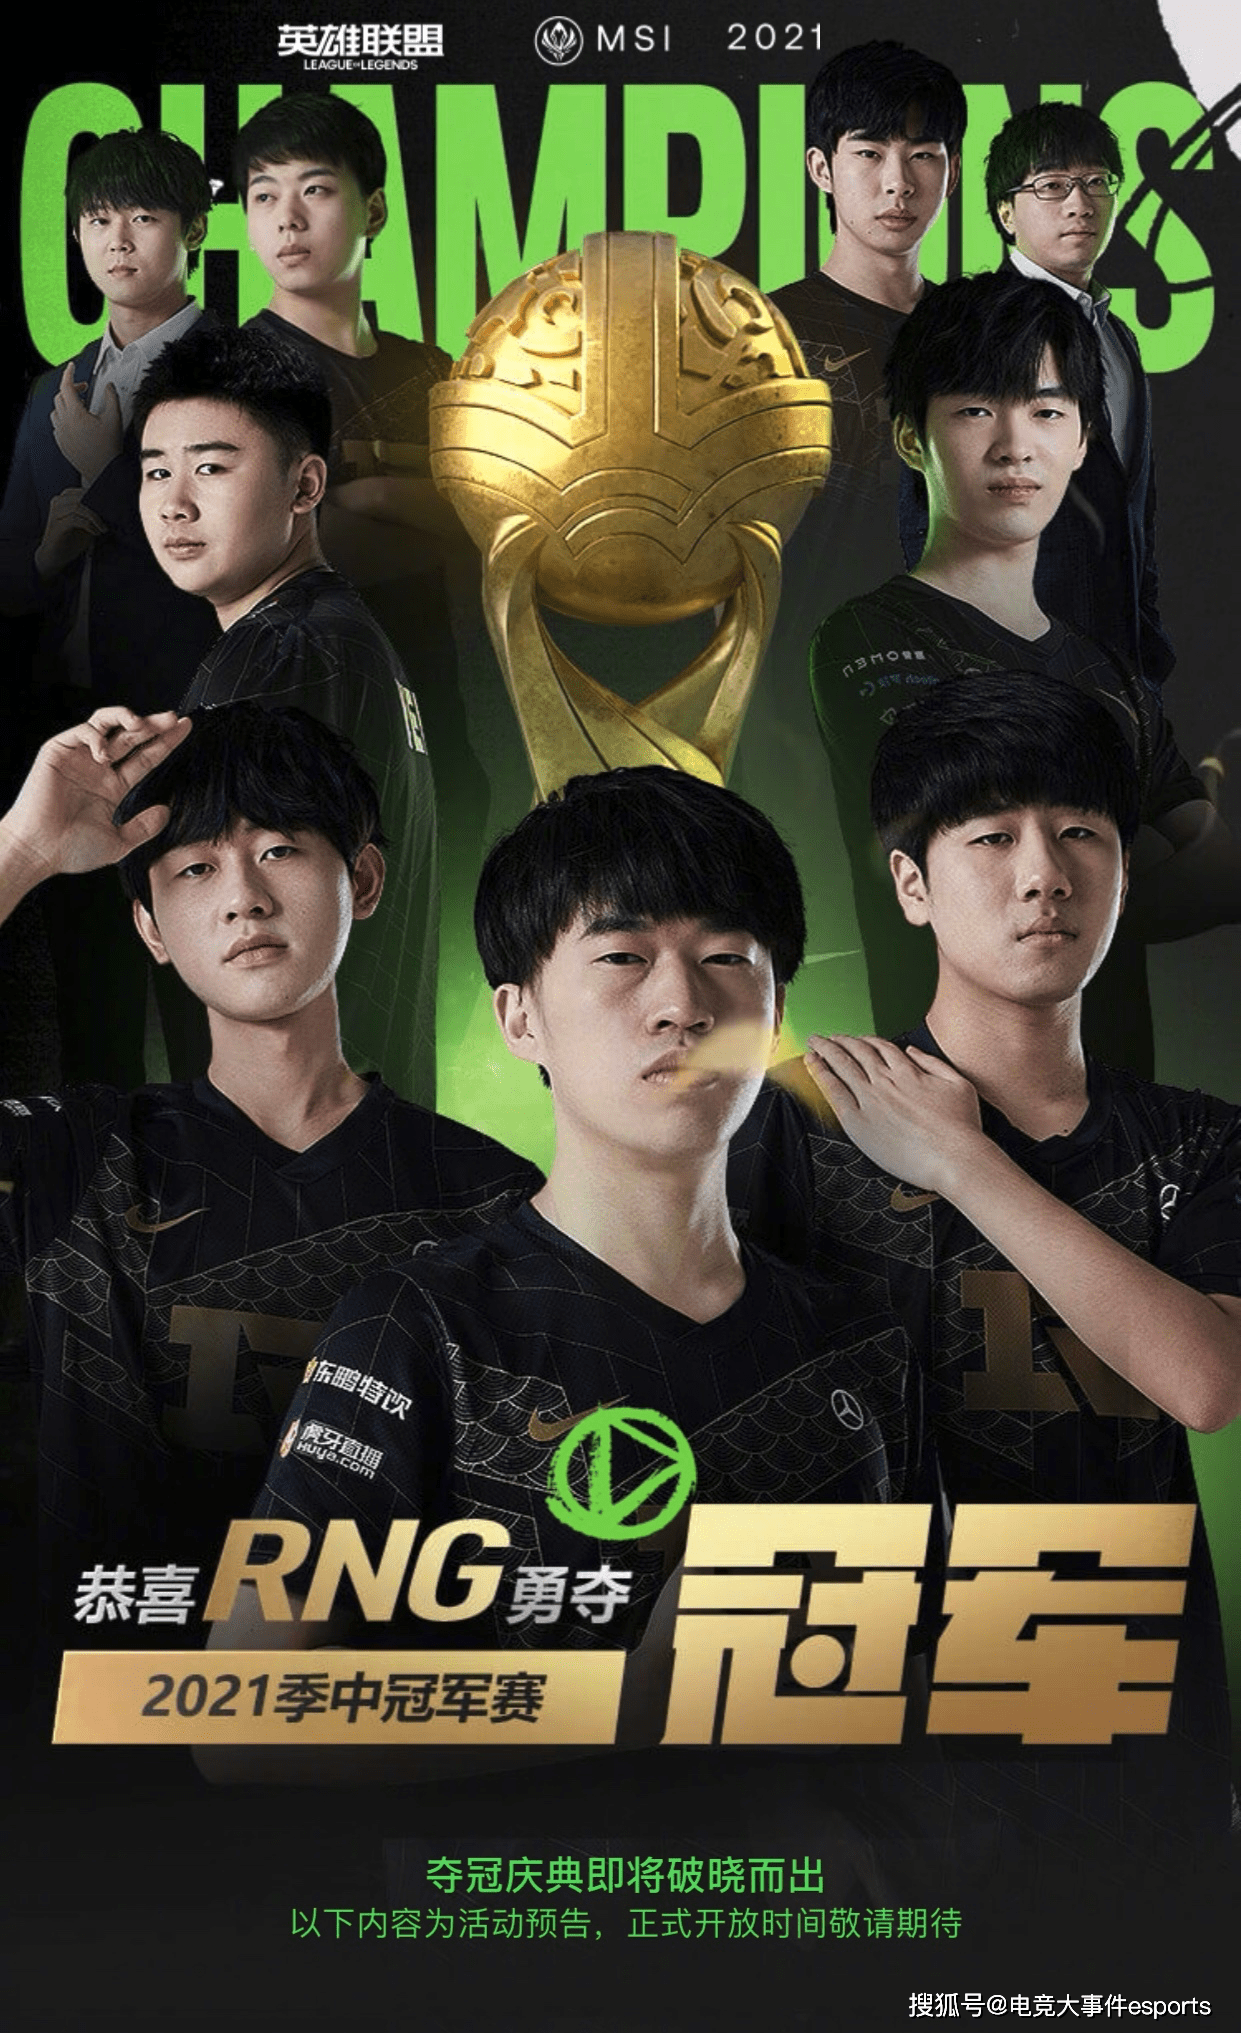 Royal Never Give Up are champions of MSI 2021: League of Legends ...